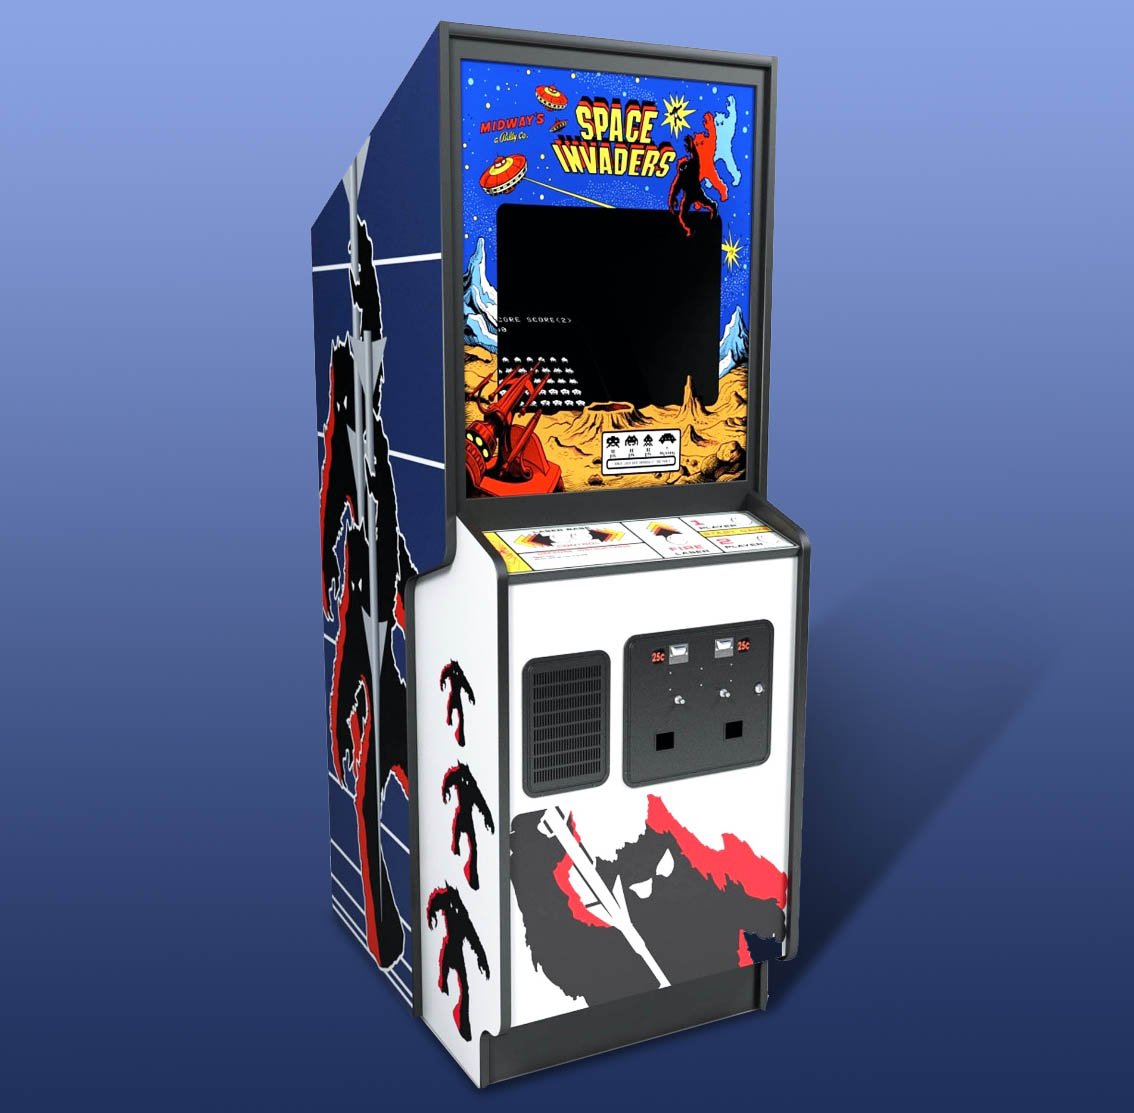 Space Invaders Arcade Machine by Midway